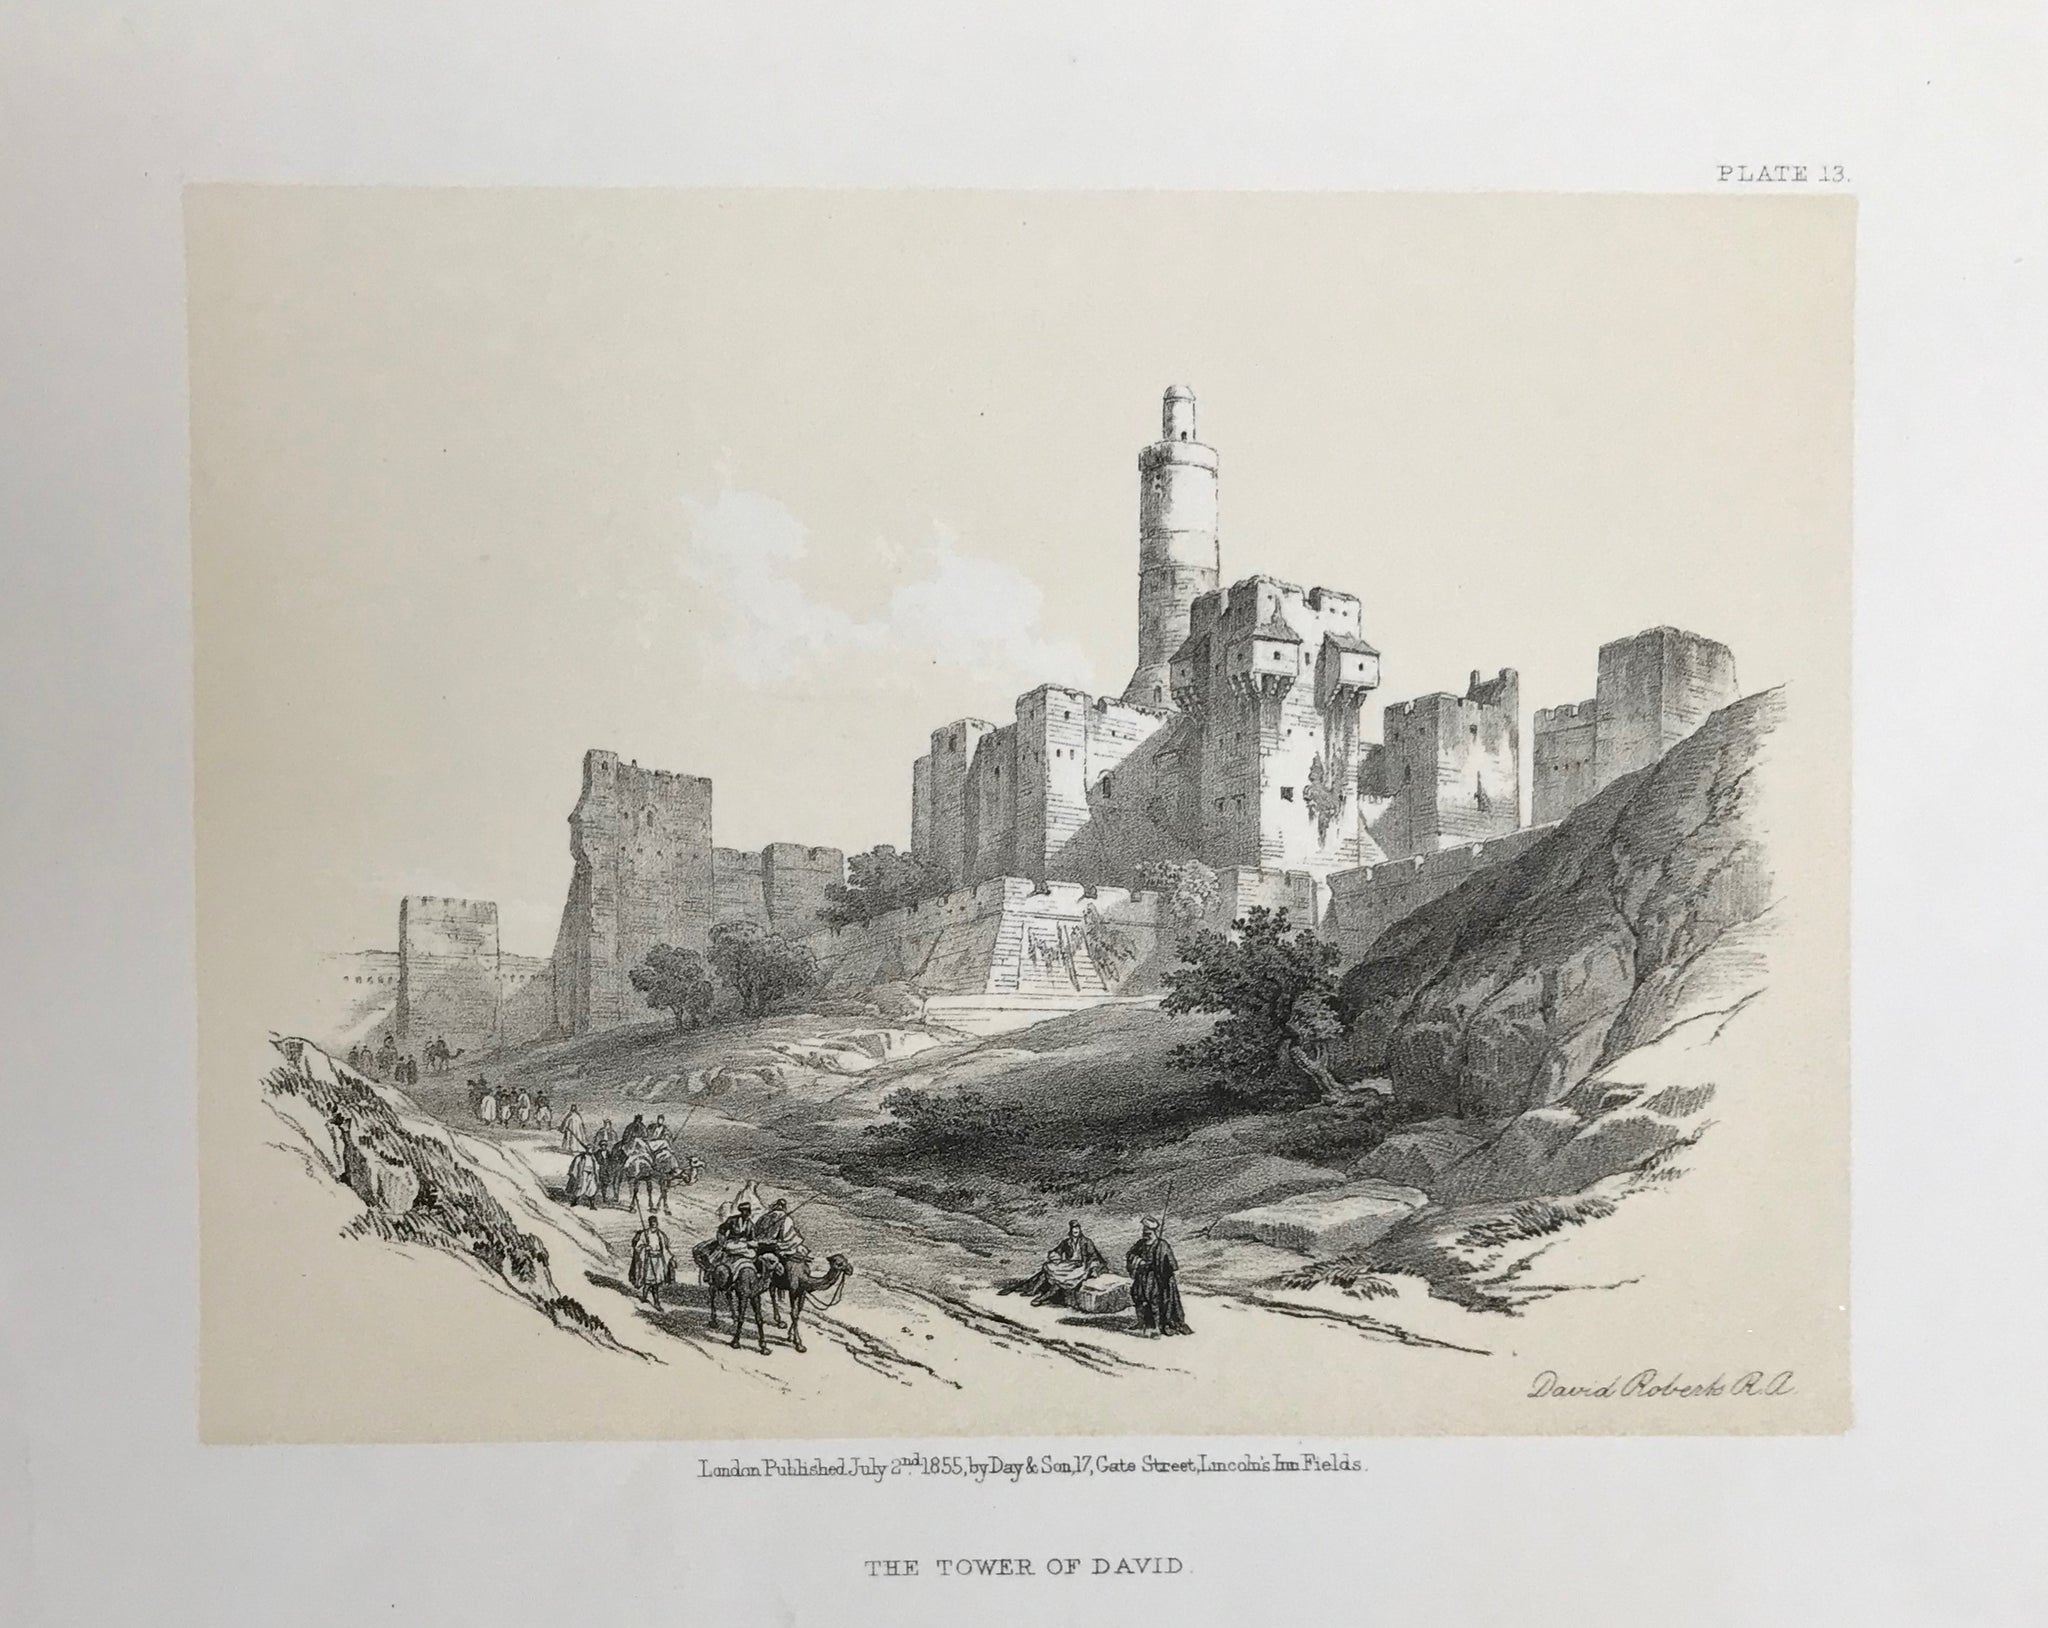 "The Tower of David"  This lithograph is from the 1855 edition published in quarto size by Day and Son in London. It is dated July 2nd, 1855.